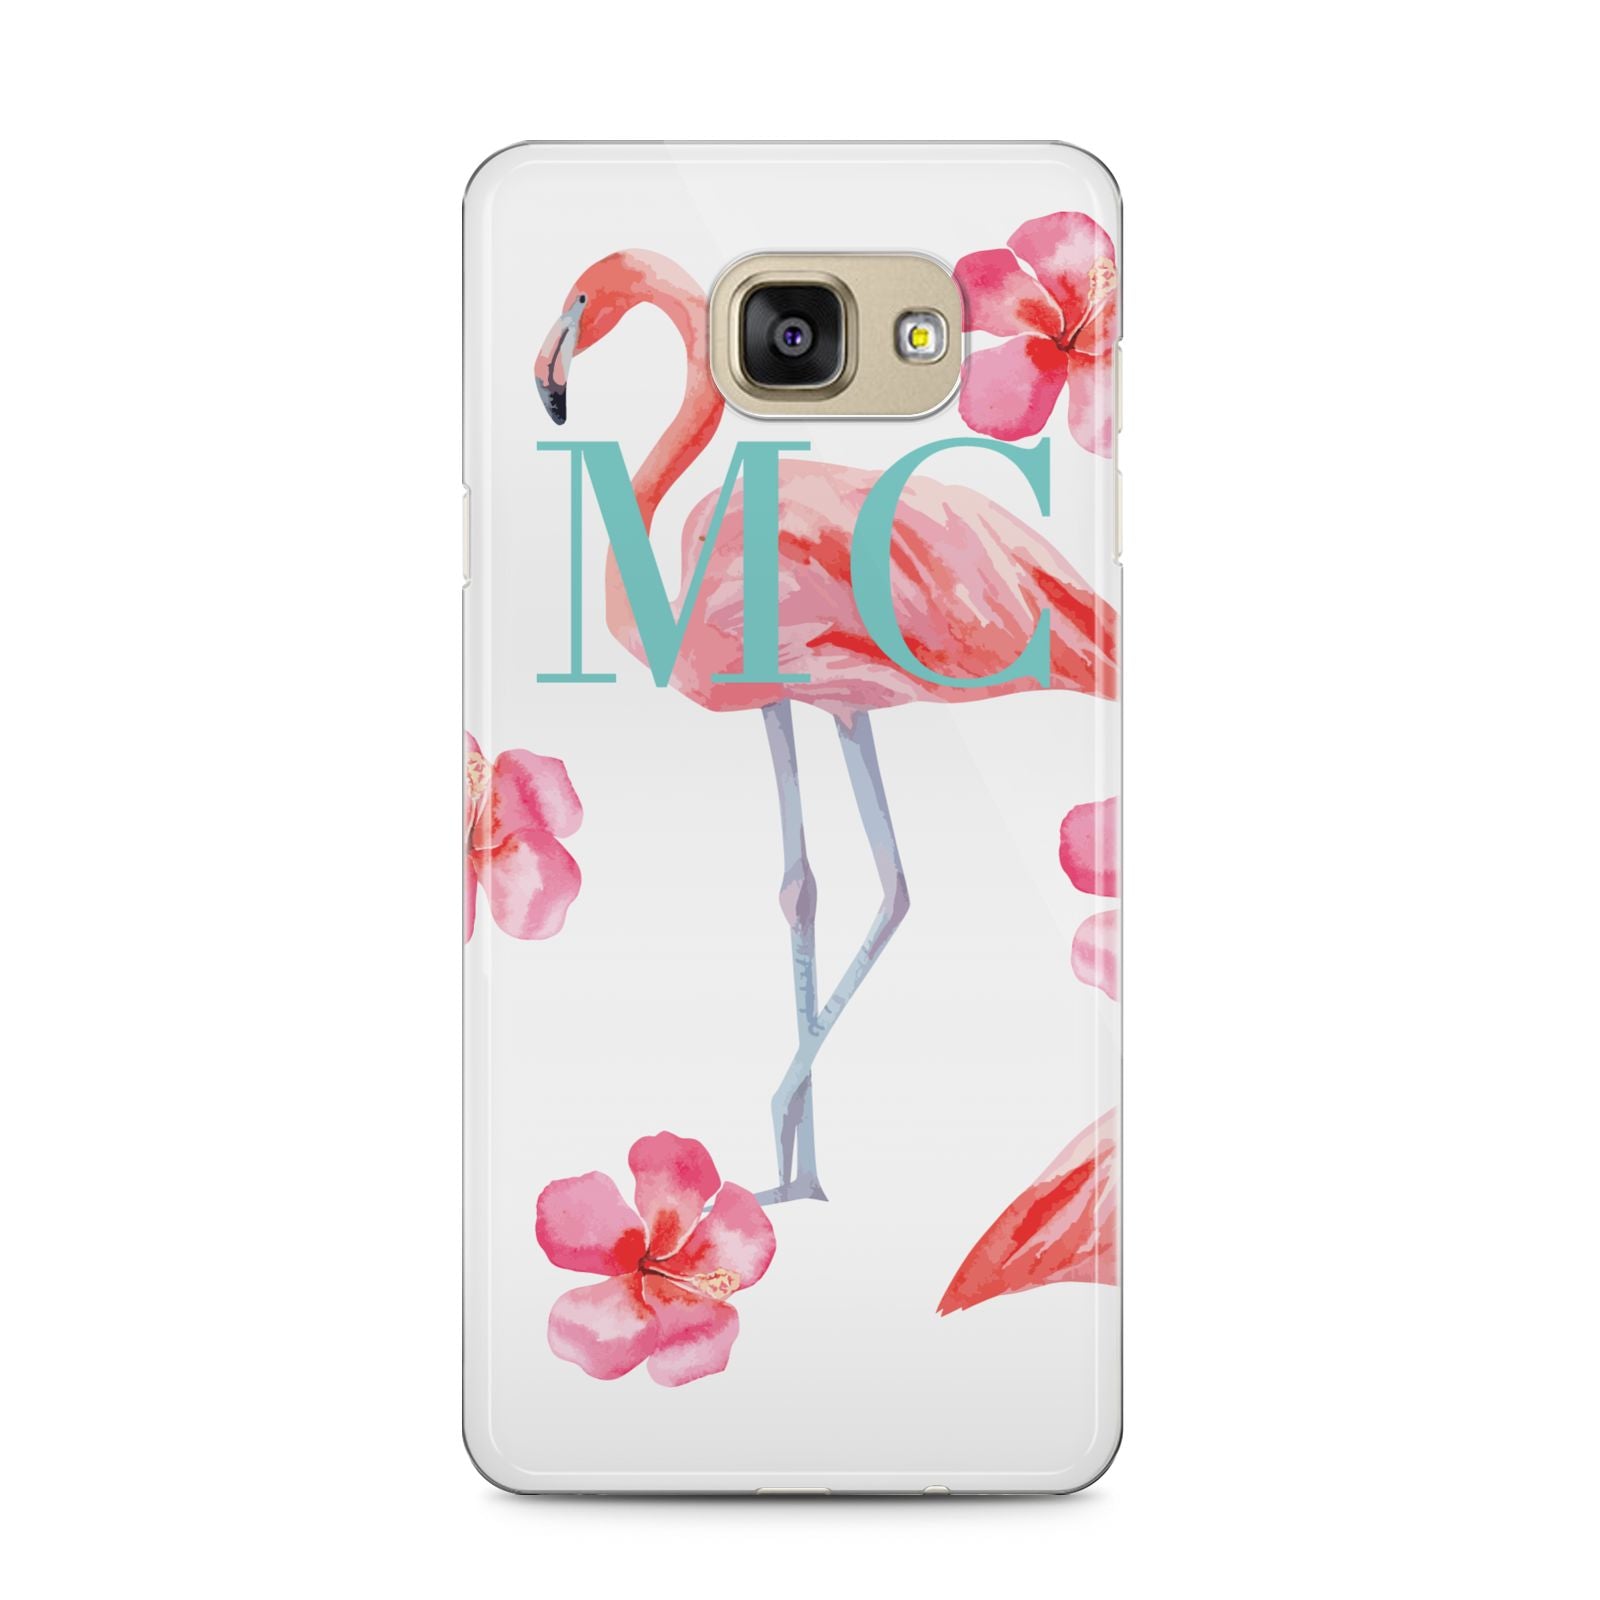 Personalised Initials Flamingo 3 Samsung Galaxy A5 2016 Case on gold phone